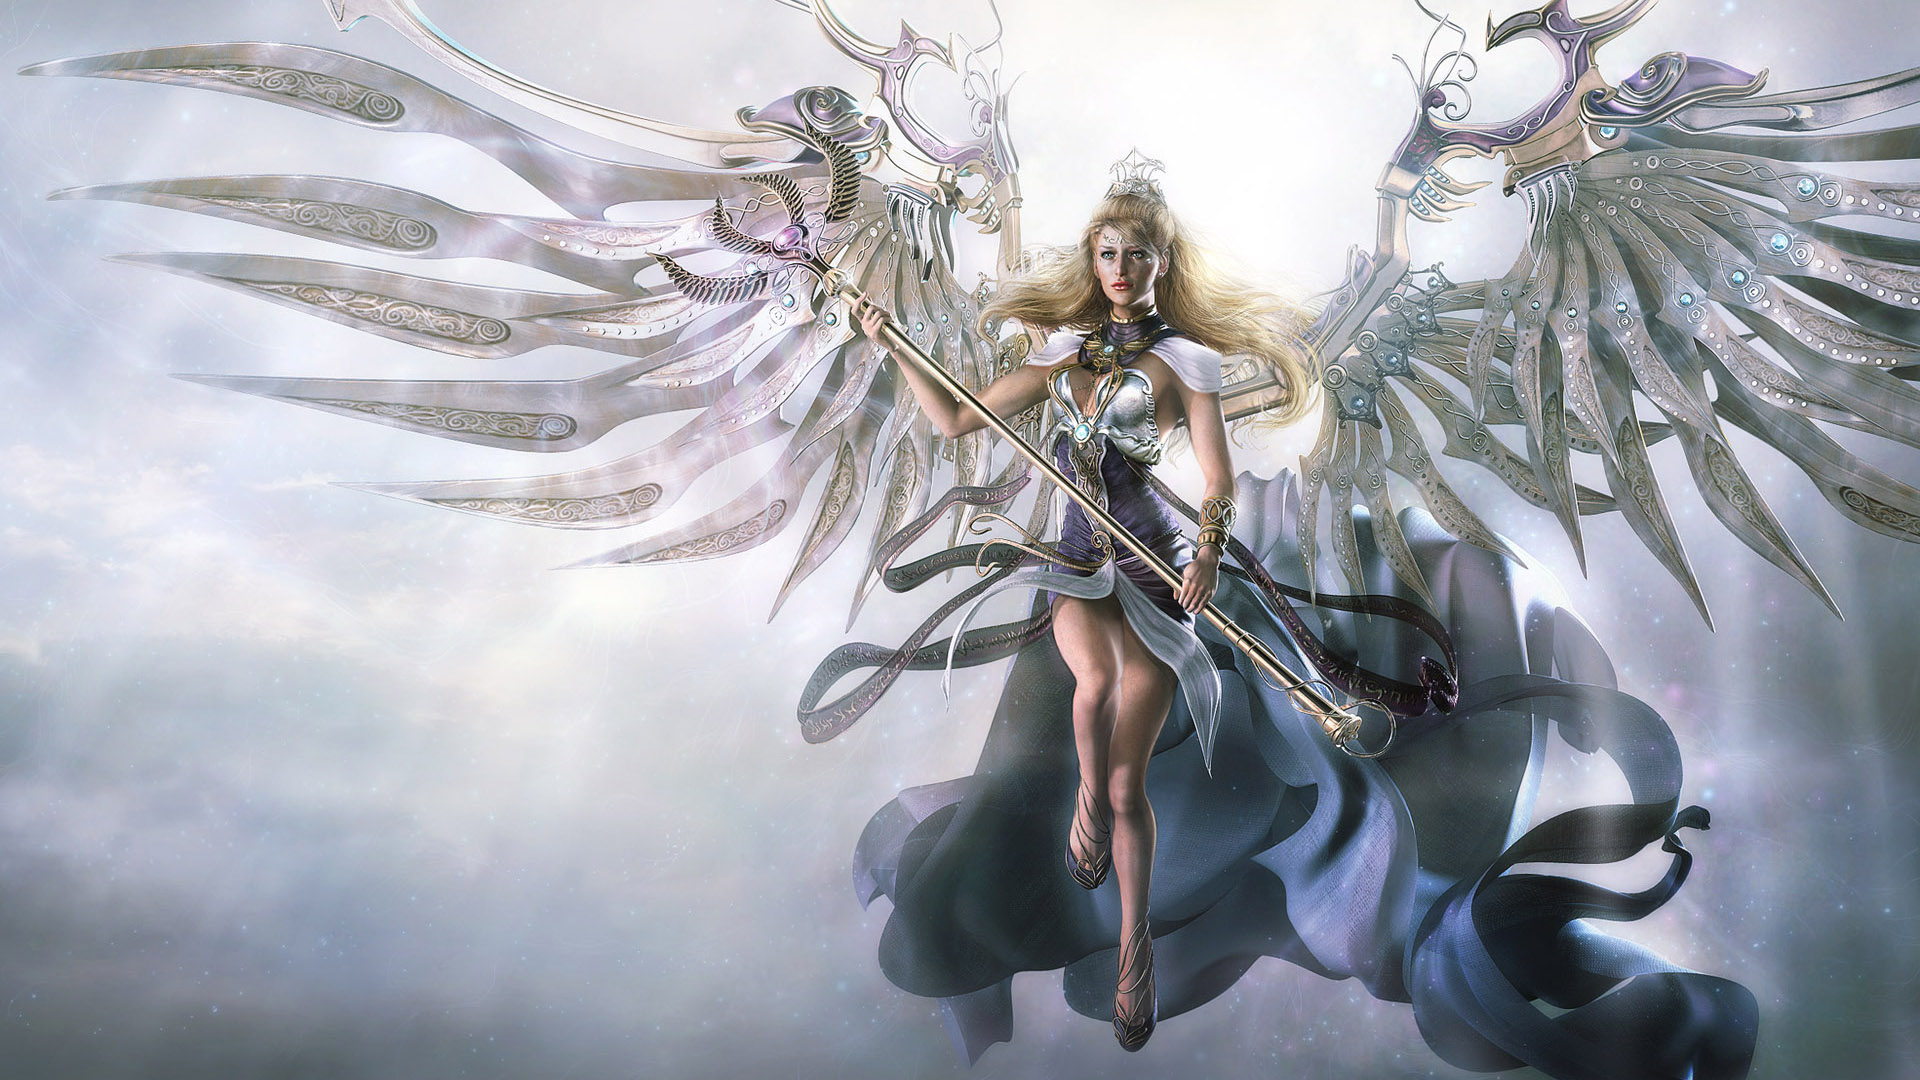 Awesome Angel 3D Fantasy Wallpaper HD Widescreen 1080p Wallpaper with